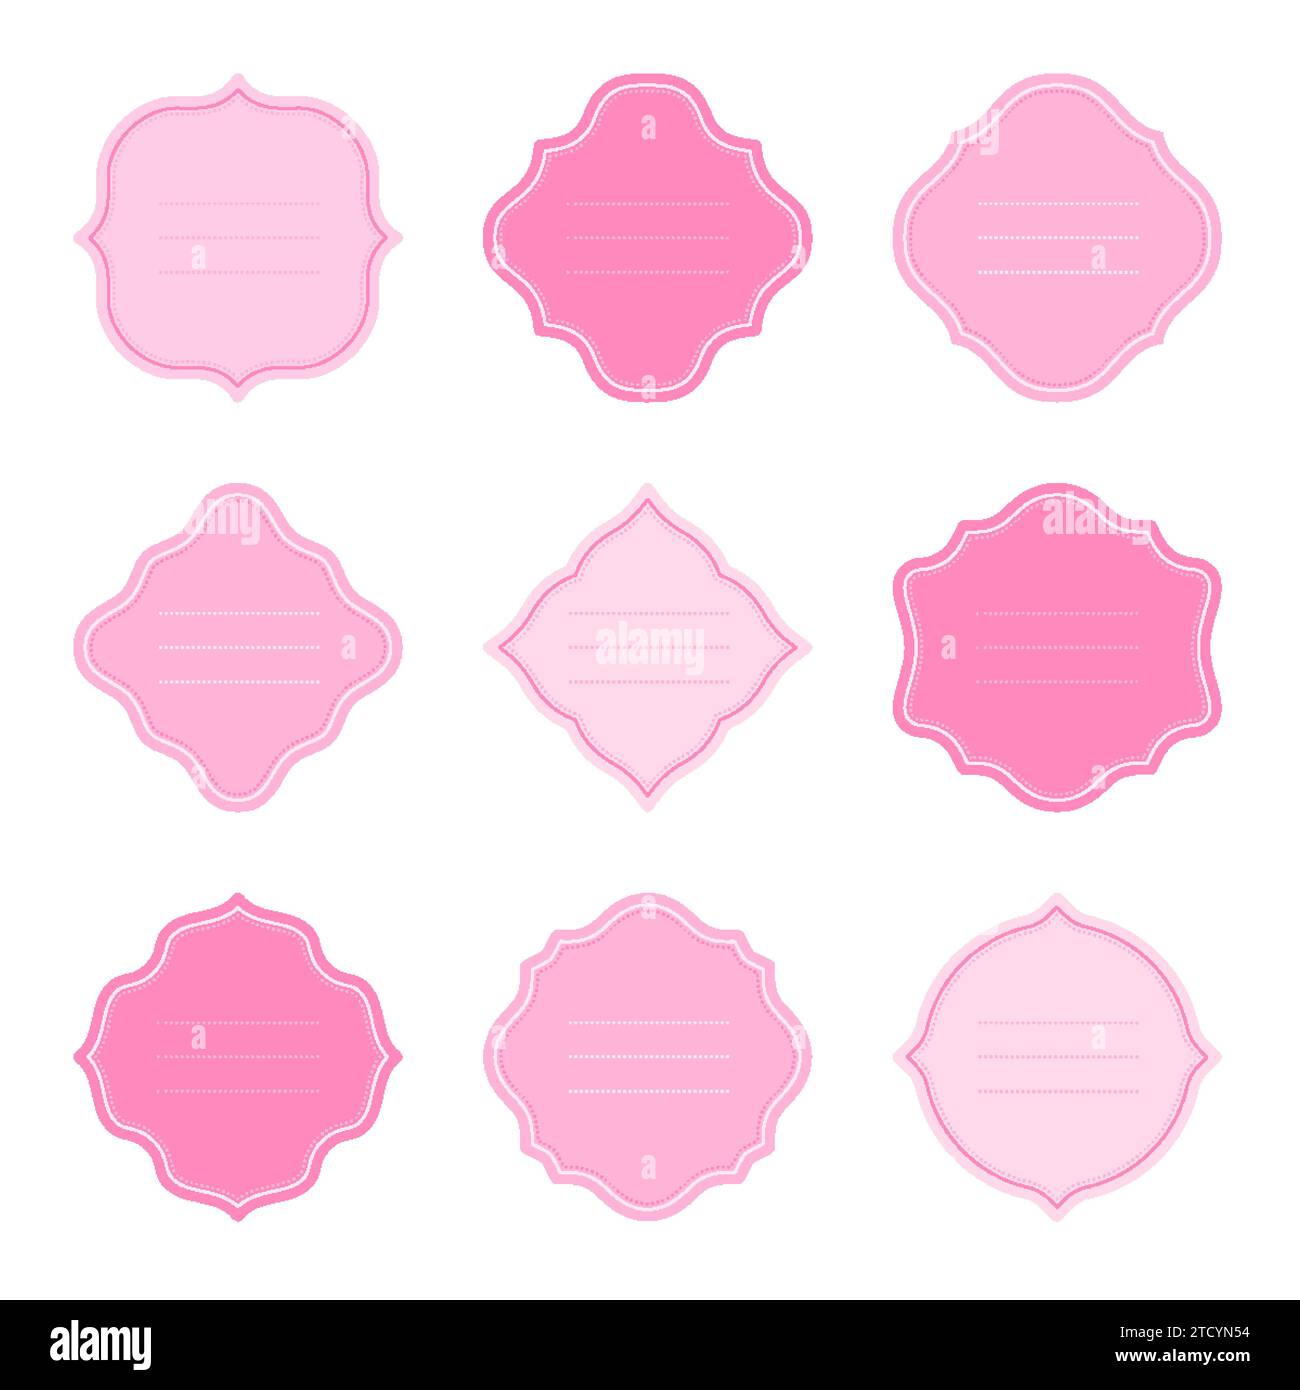 Frame label tag sticker shape cute pink flat set. Romantic elegant wedding holiday sweetheart paper price tag stamp name card gift label insignia invitation sale ornate retro print seal isolated Stock Vector